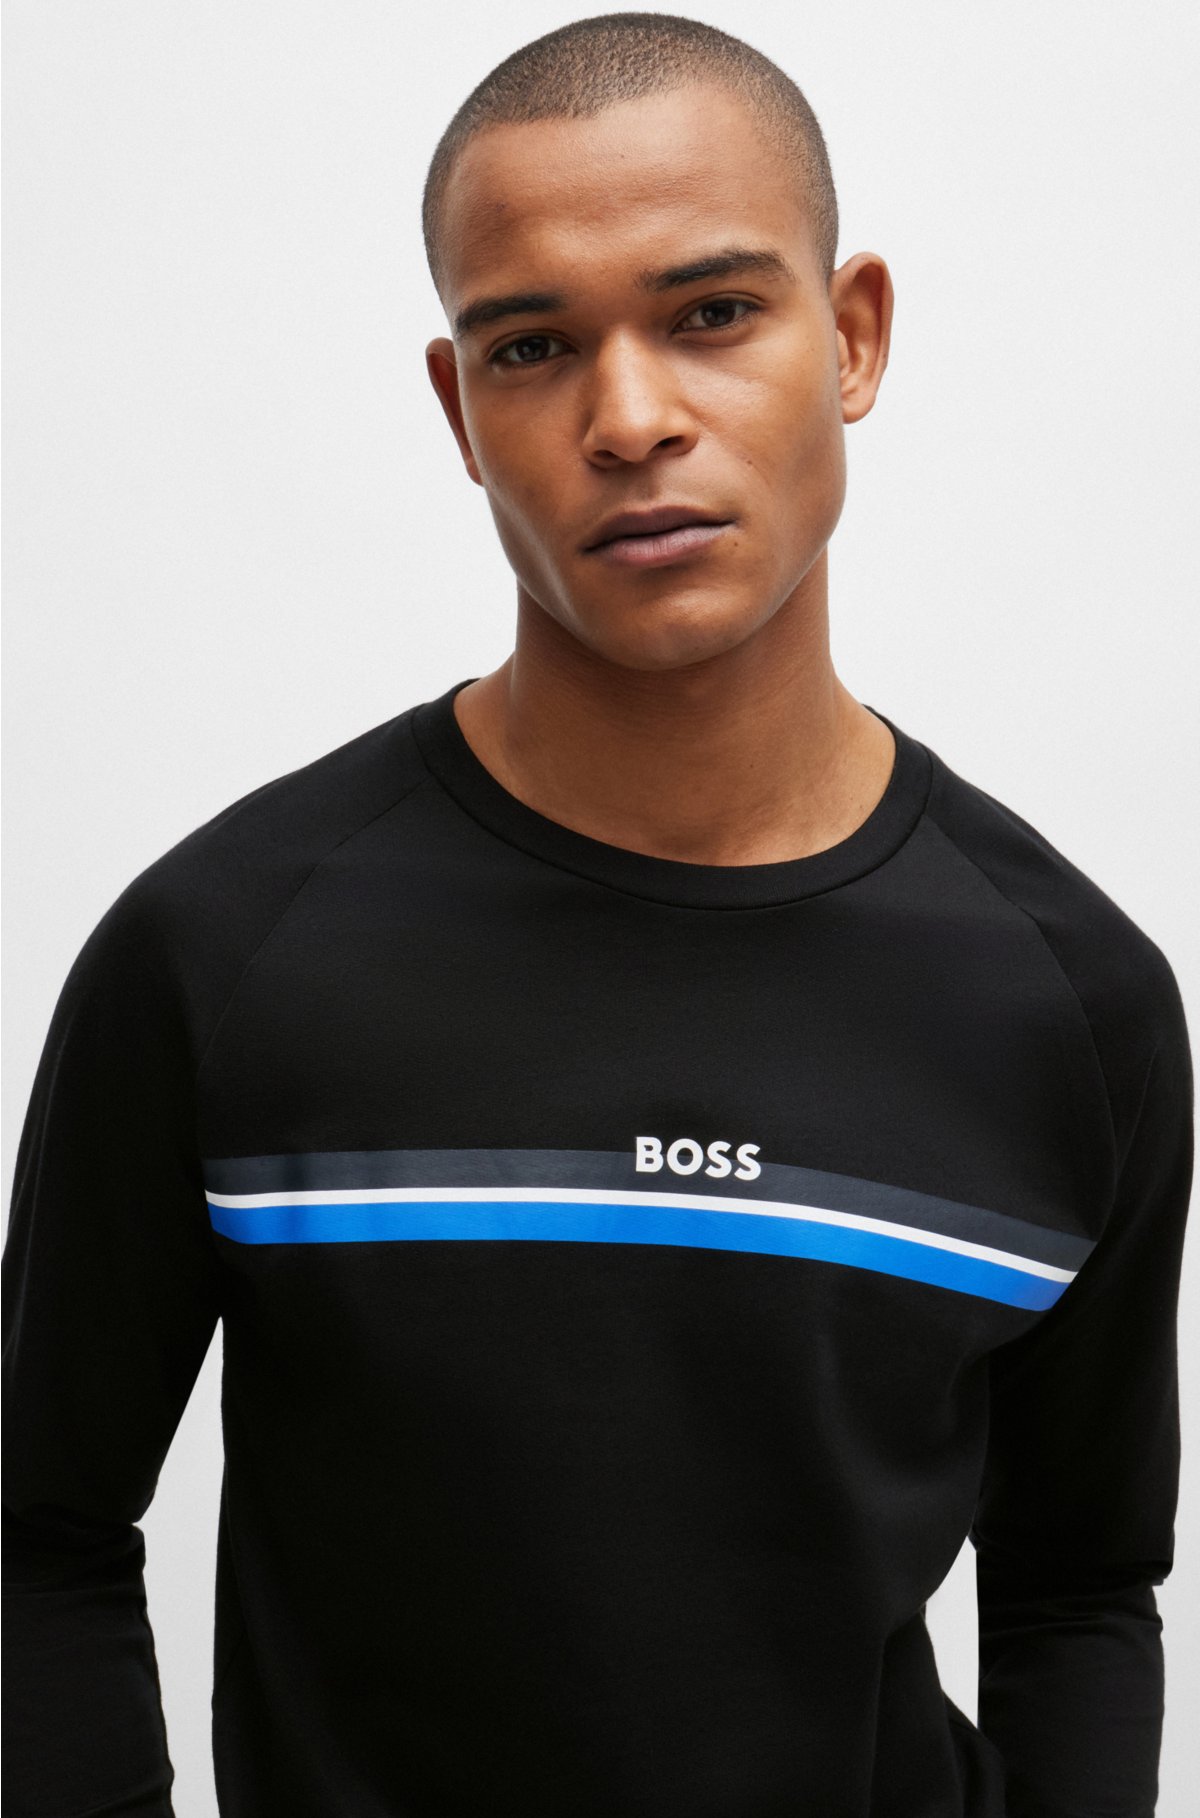 Cotton-terry sweatshirt with stripes and logo, Black